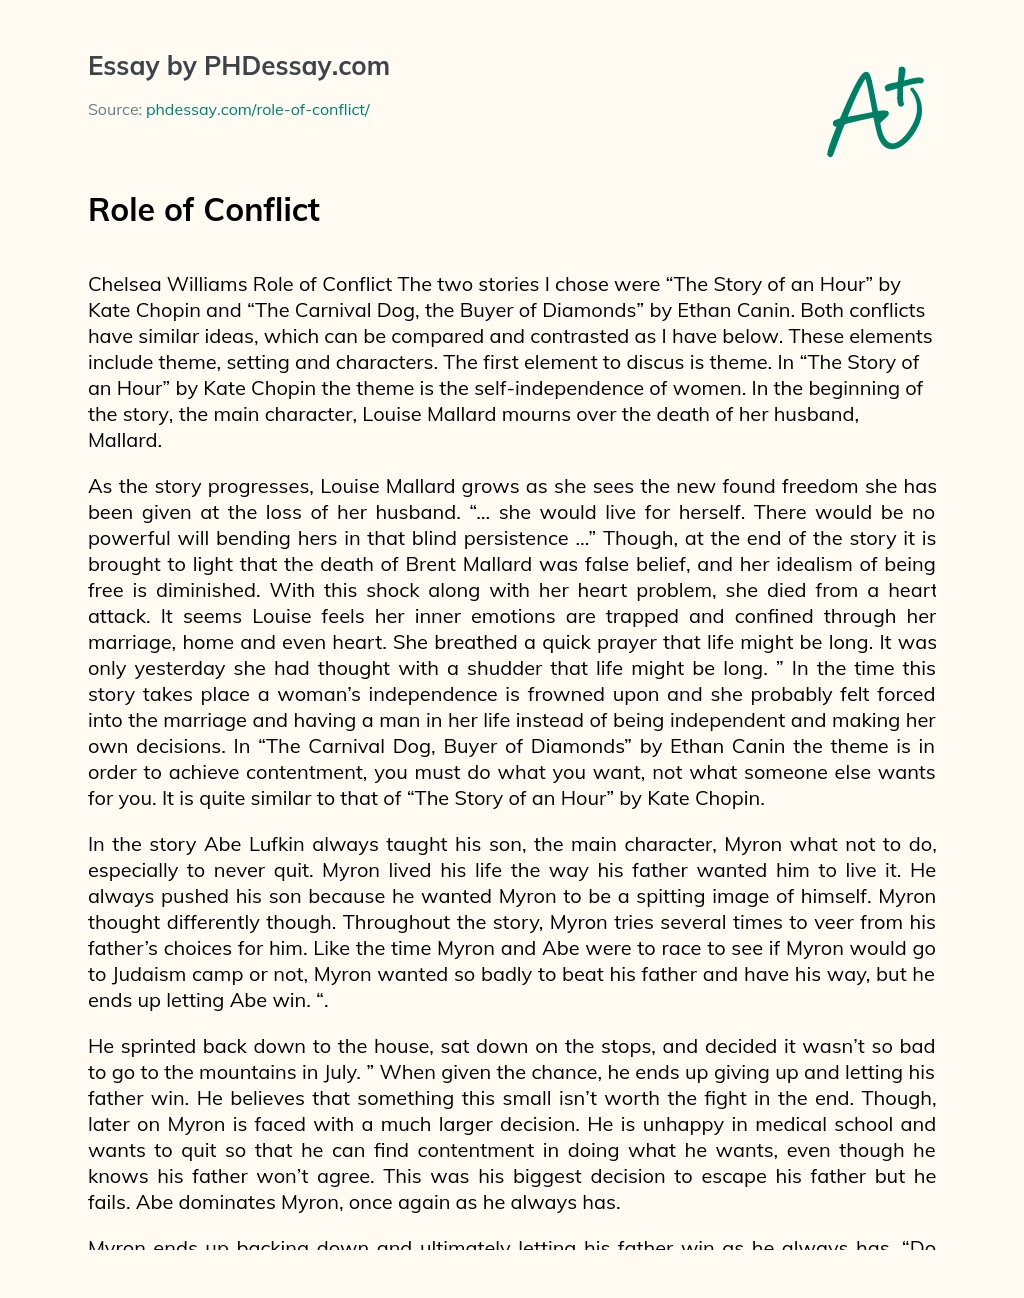 Role of Conflict essay